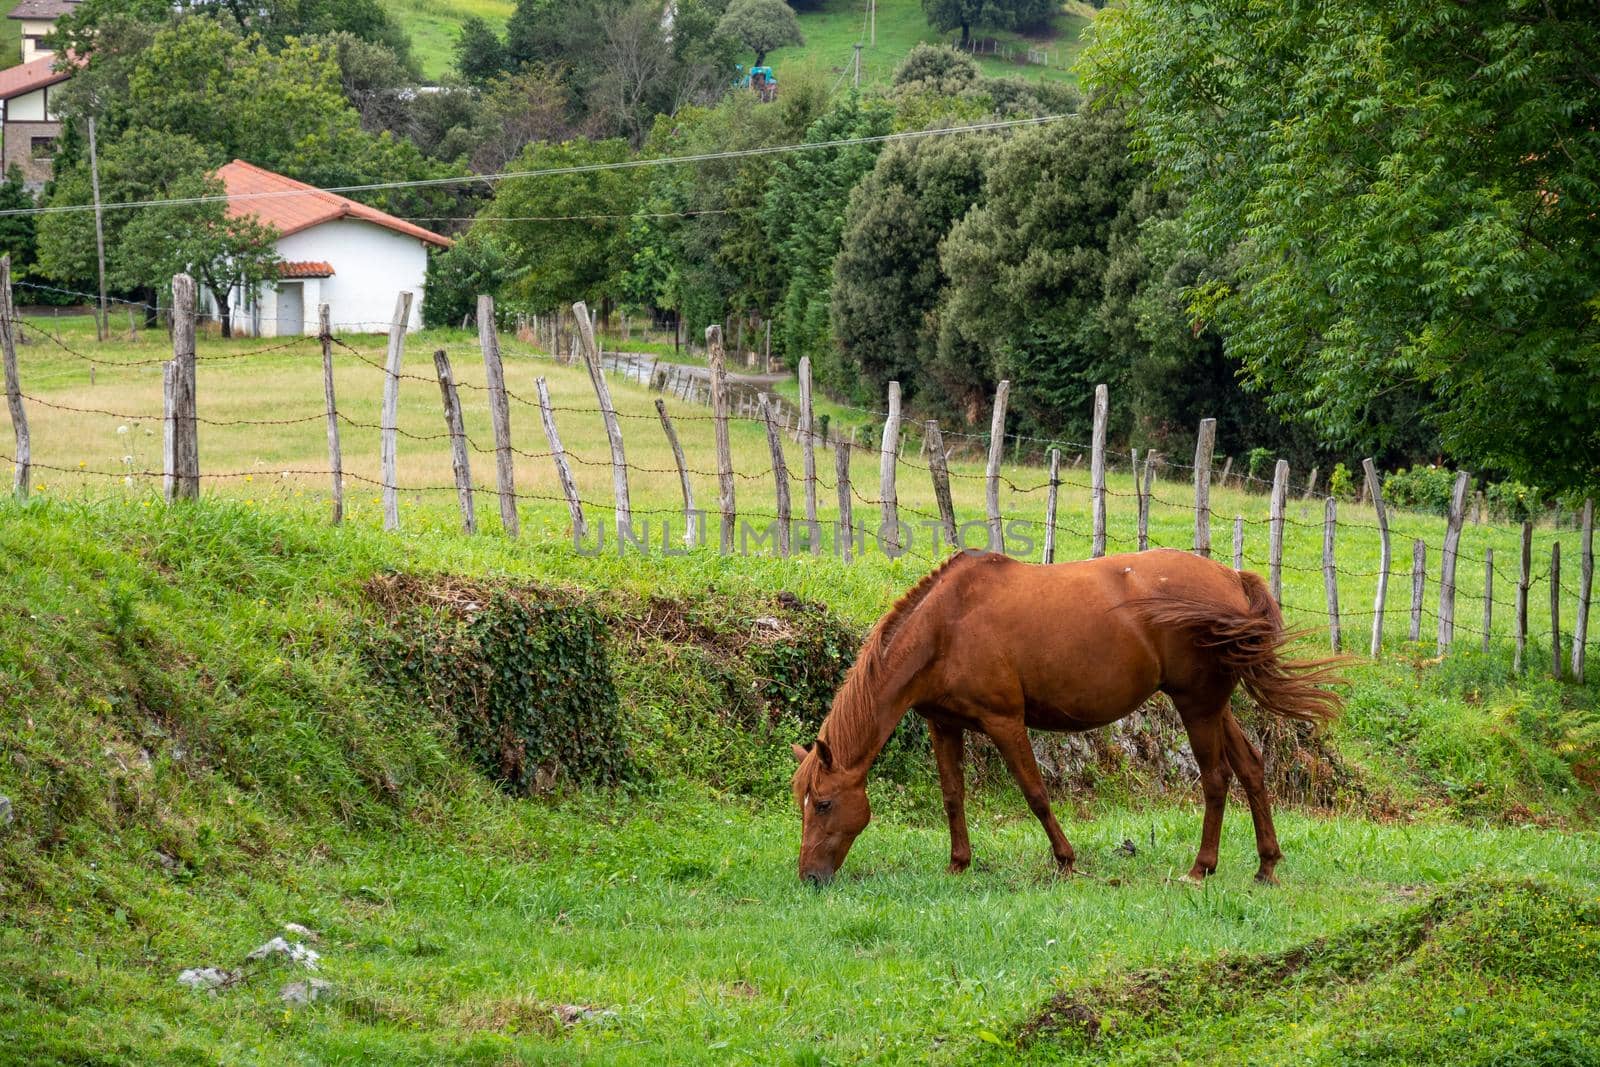 A brown horse grazes and wags its tail on a farm pasture surrounded by a fence and trees.